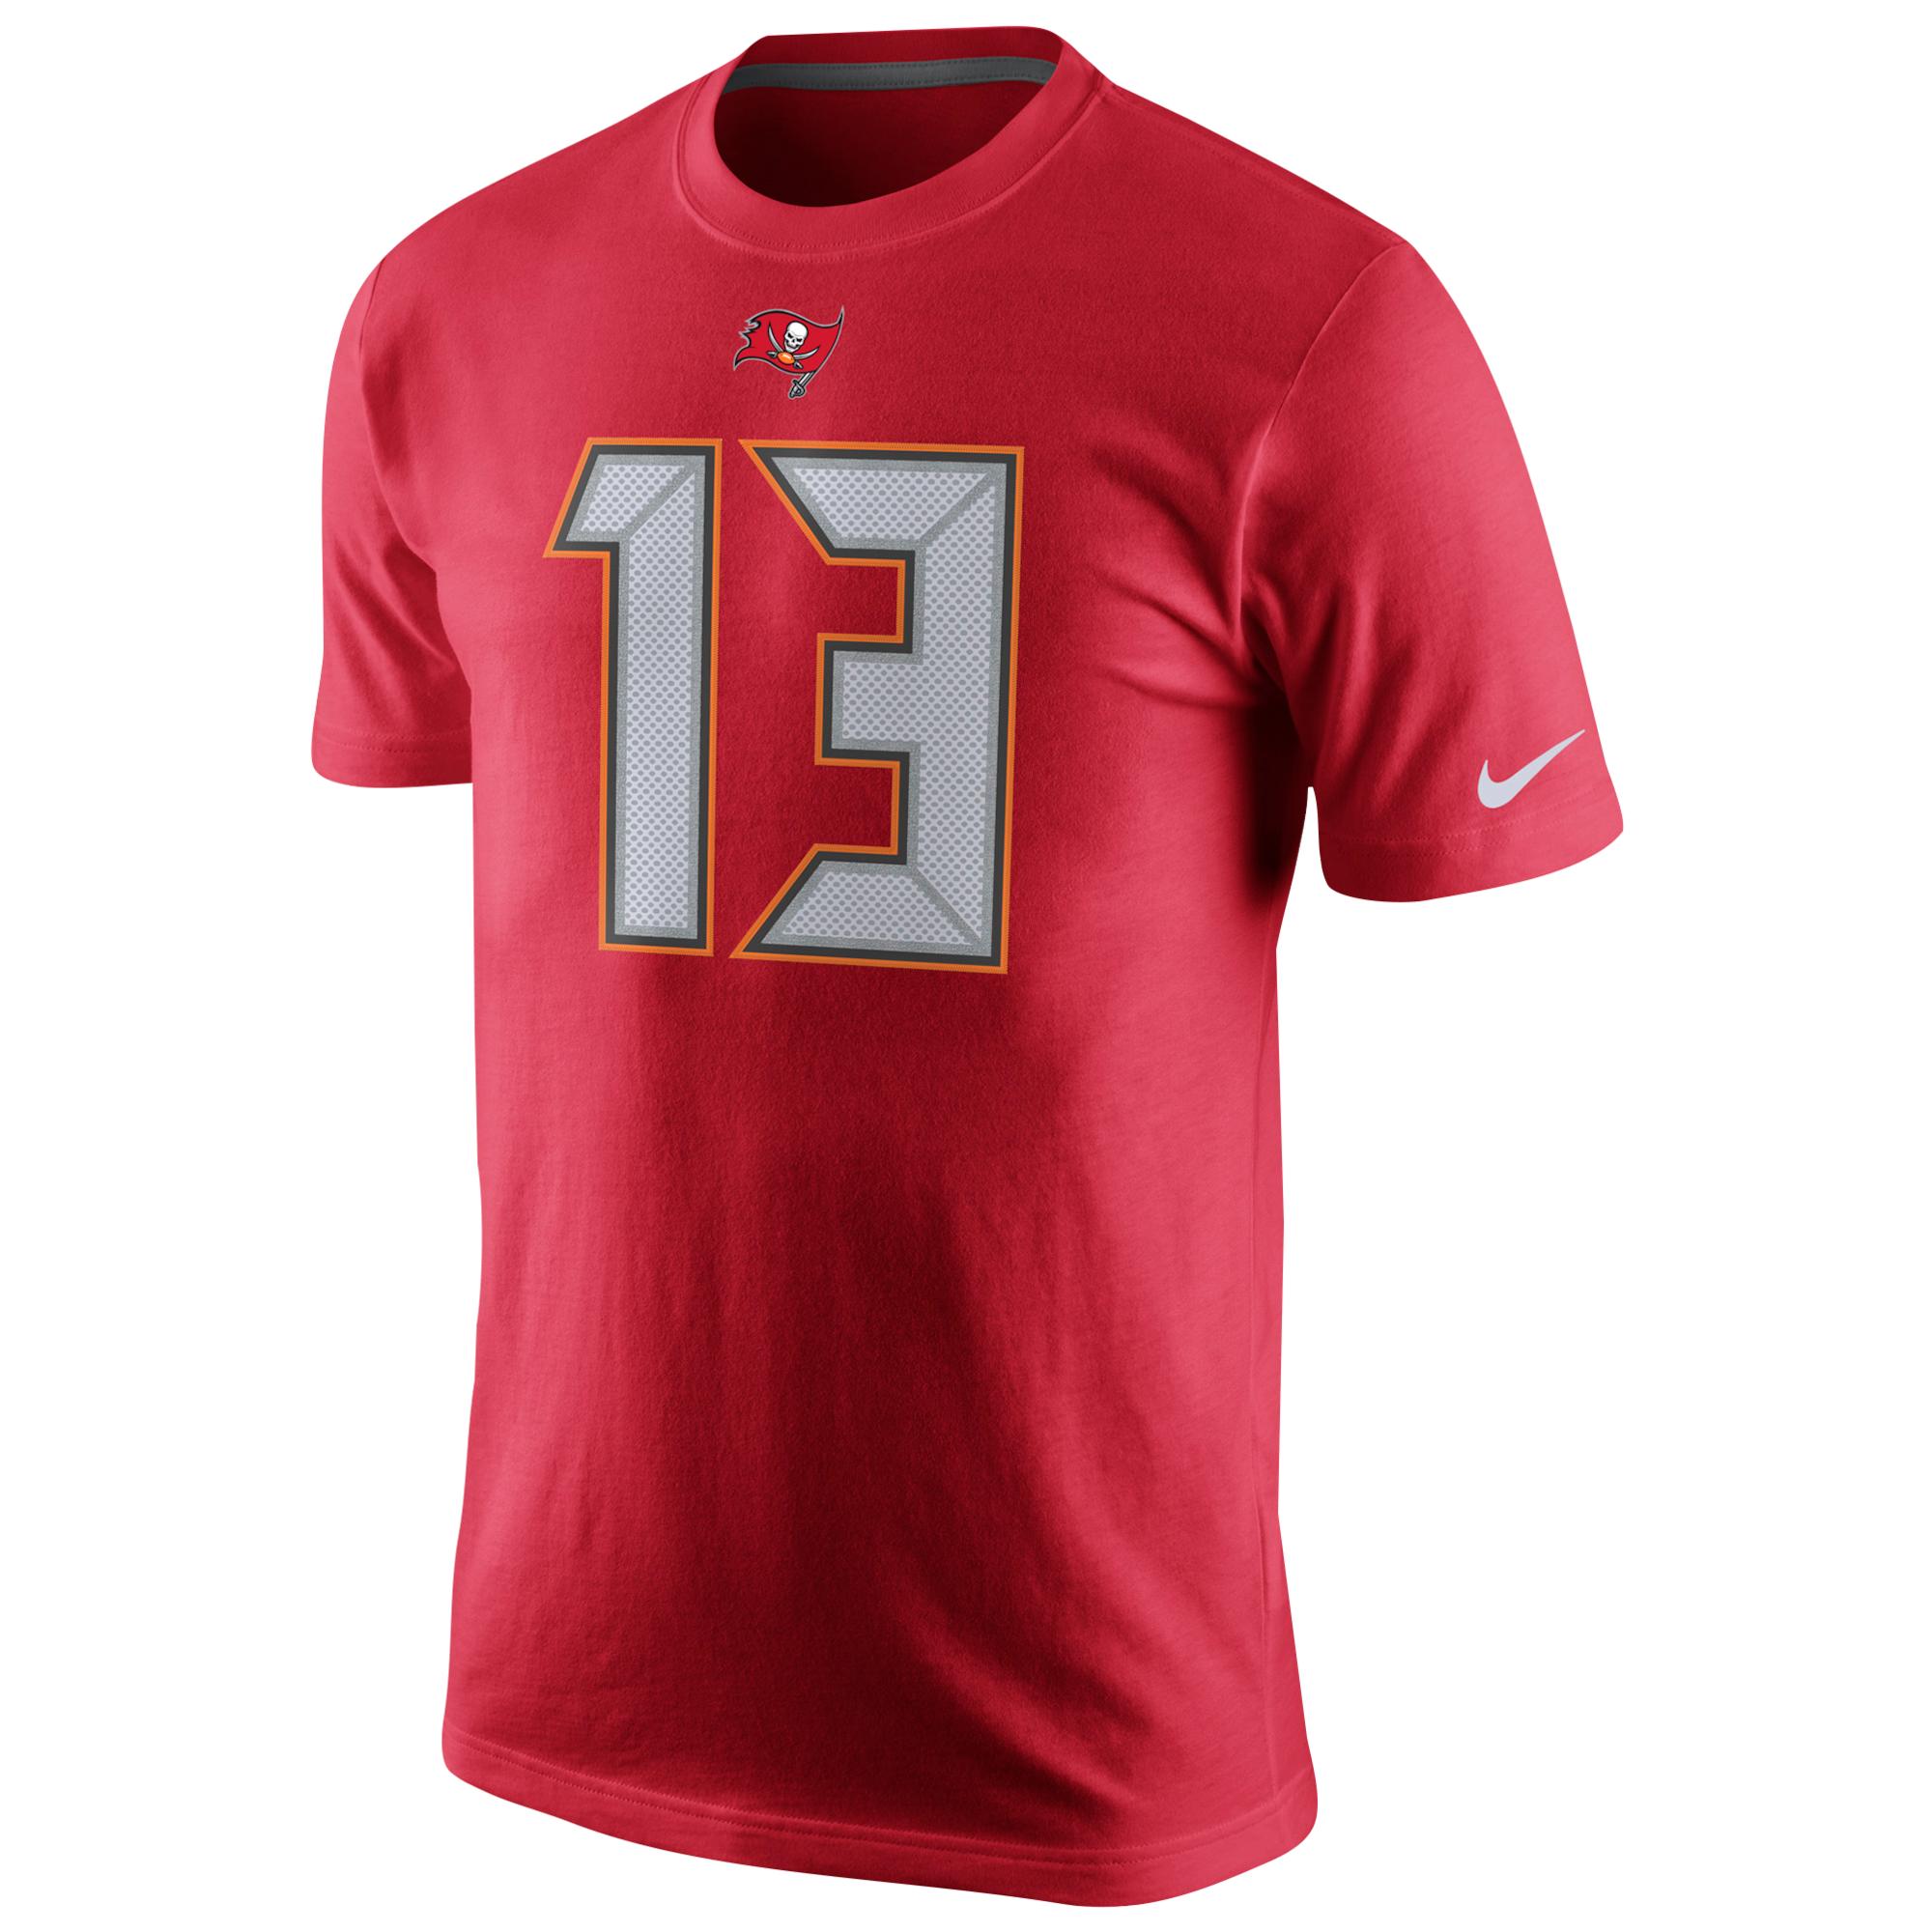 Nike Cotton Nfl Player Pride T-shirt in Red for Men - Lyst